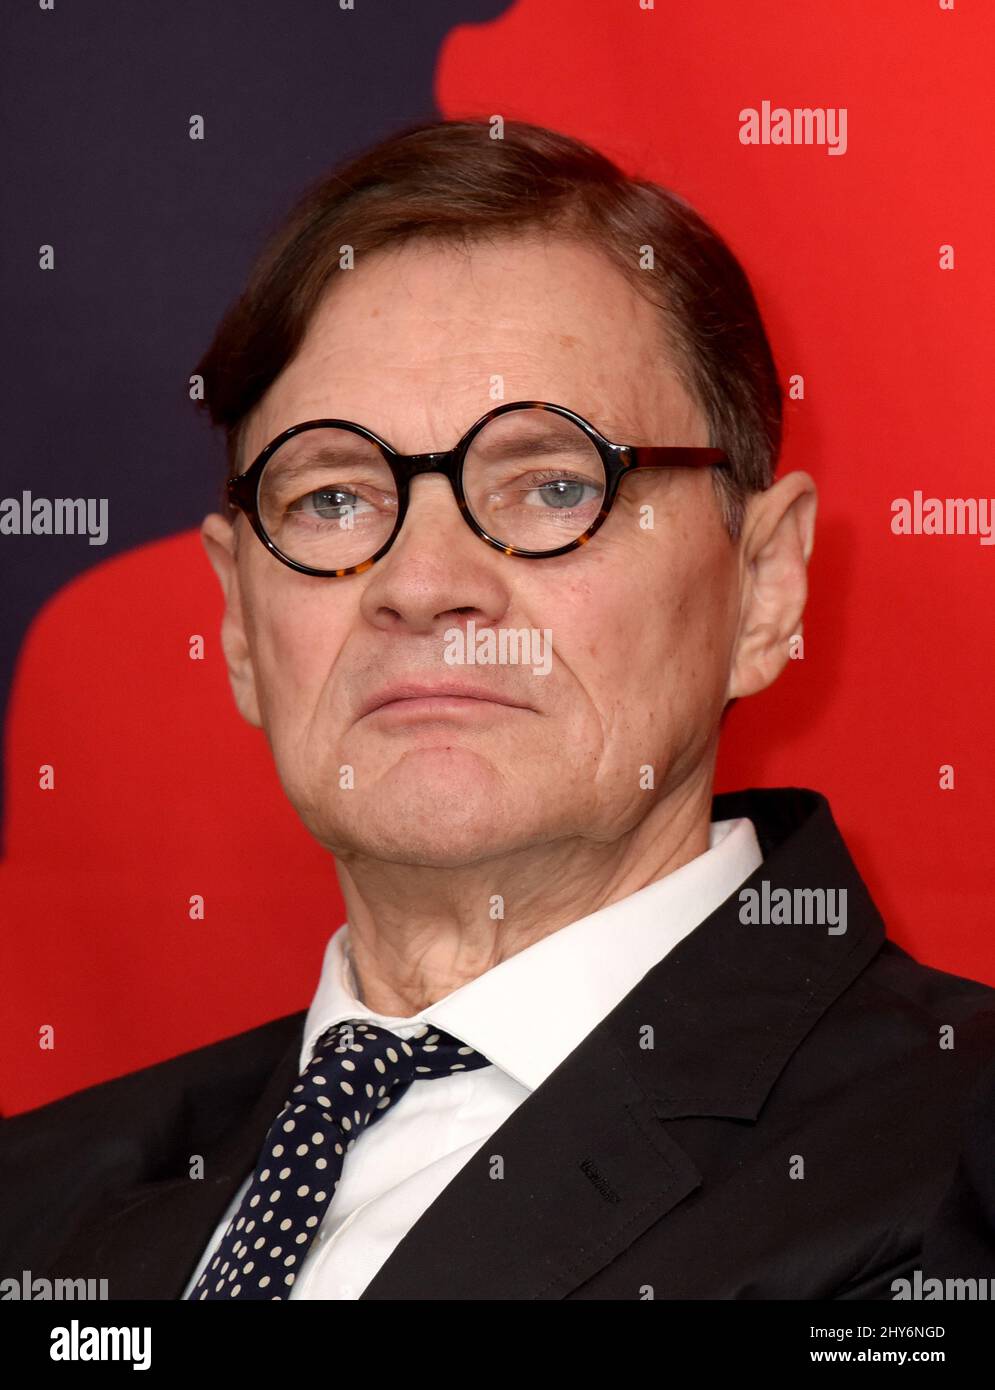 Michael Cotten as Zhenjiang Media Group and Legend River Entertainment host press conference to announce new theatrical production of 'Pearl' based on the life of Pearl S. Buck held at the Beverly Hilton Hotel Stock Photo